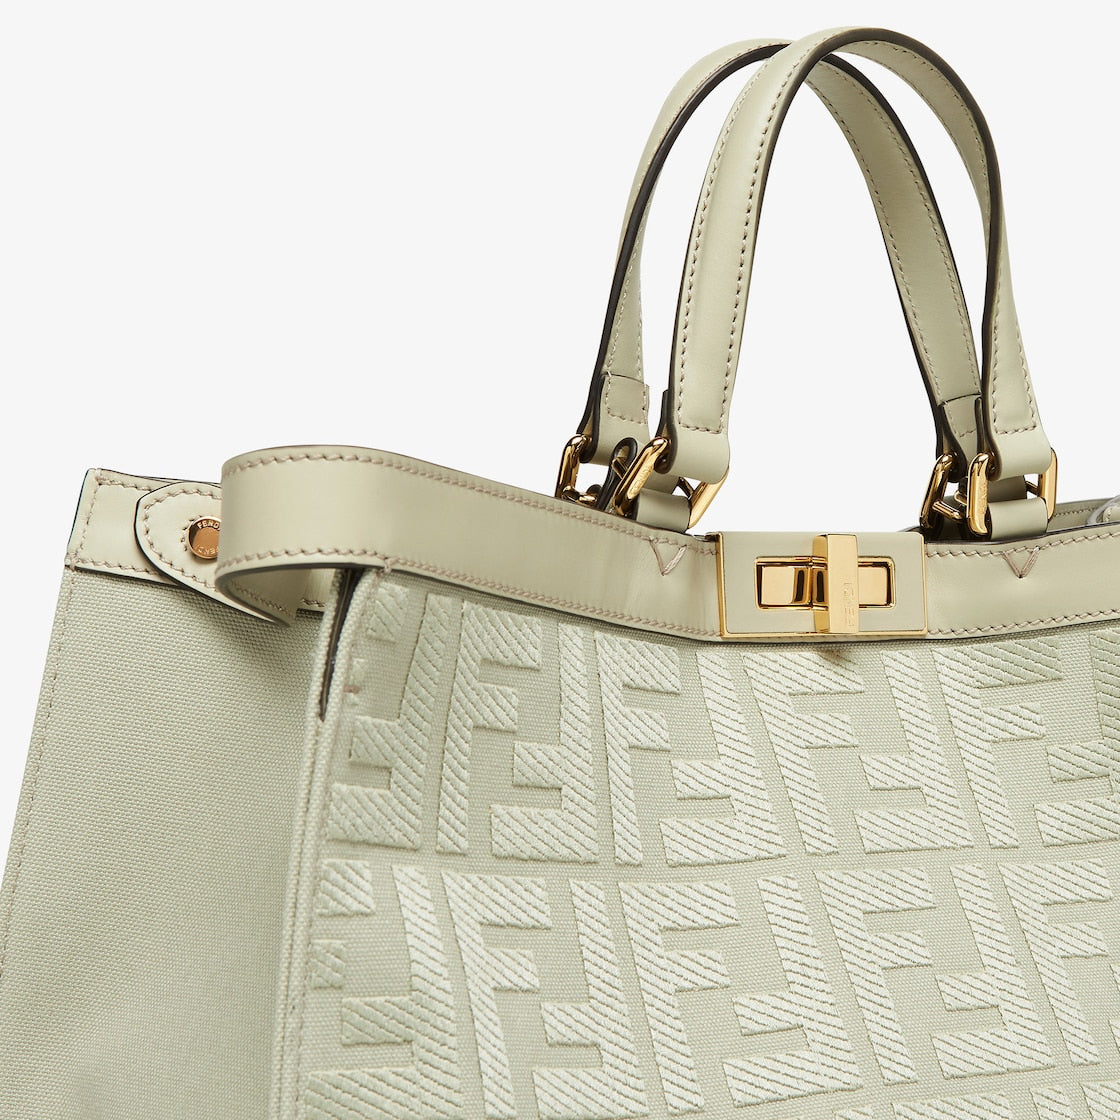 FENDI Green Calf Leather Tote for the Chic and Stylish SS23 Fashion Season